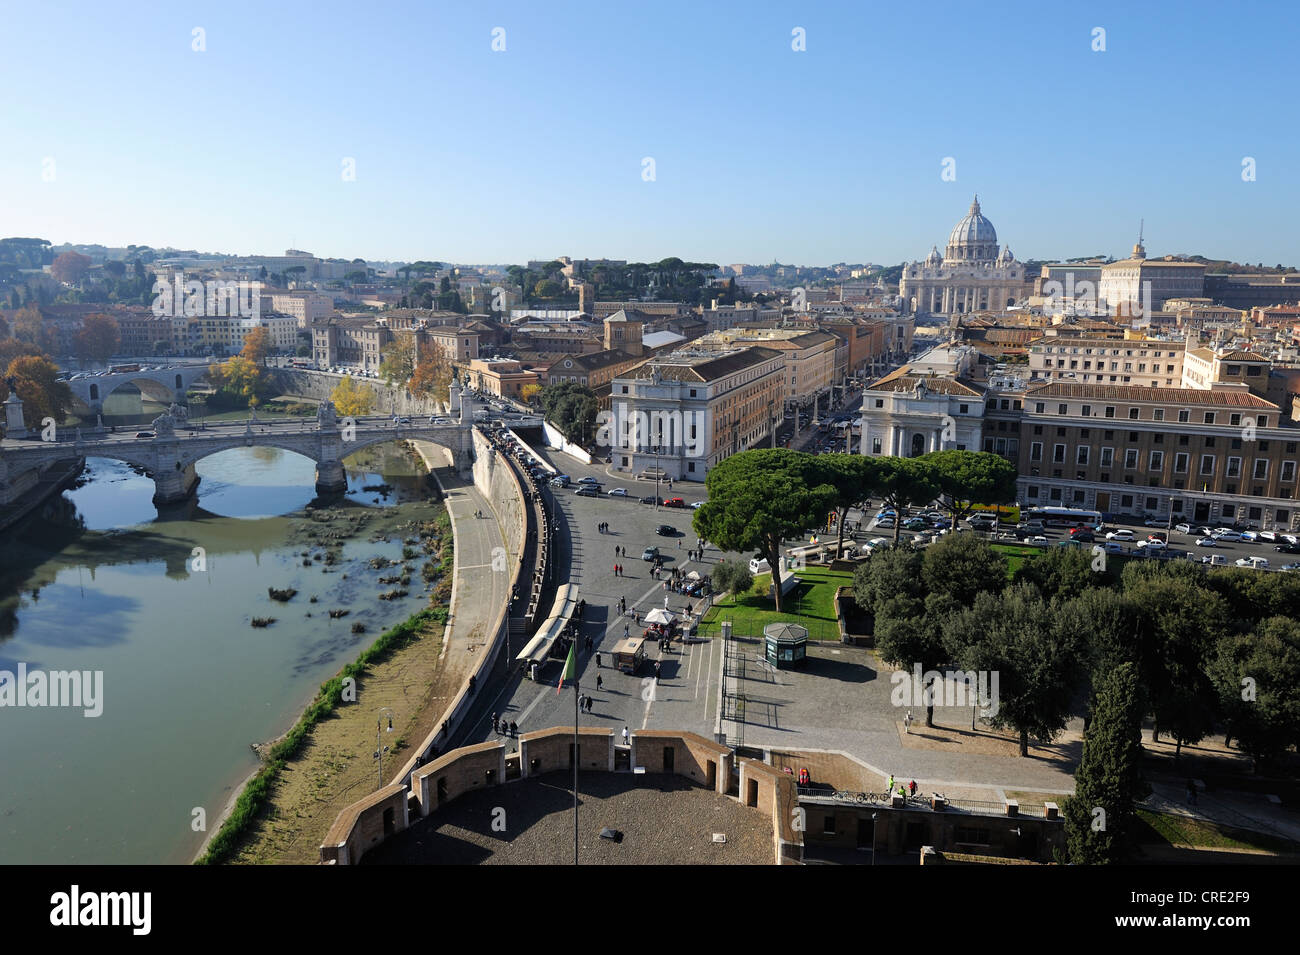 View of the Tiber river and the Vatican from Castel Sant'Angelo, Rome, Italy, Europe Stock Photo